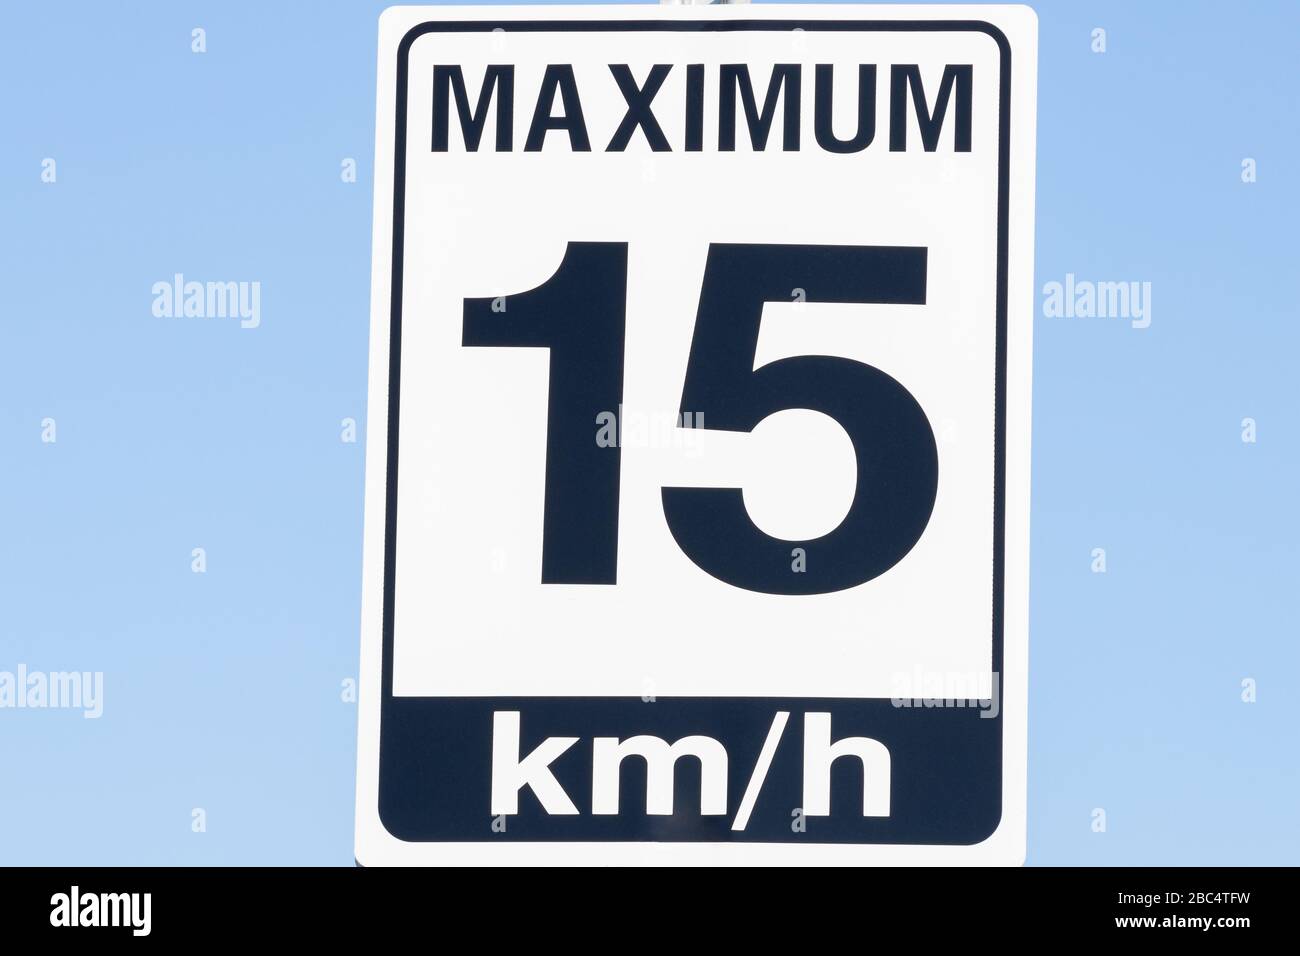 15 KM/H speed warning sign, close up view with blue sky background. Stock Photo